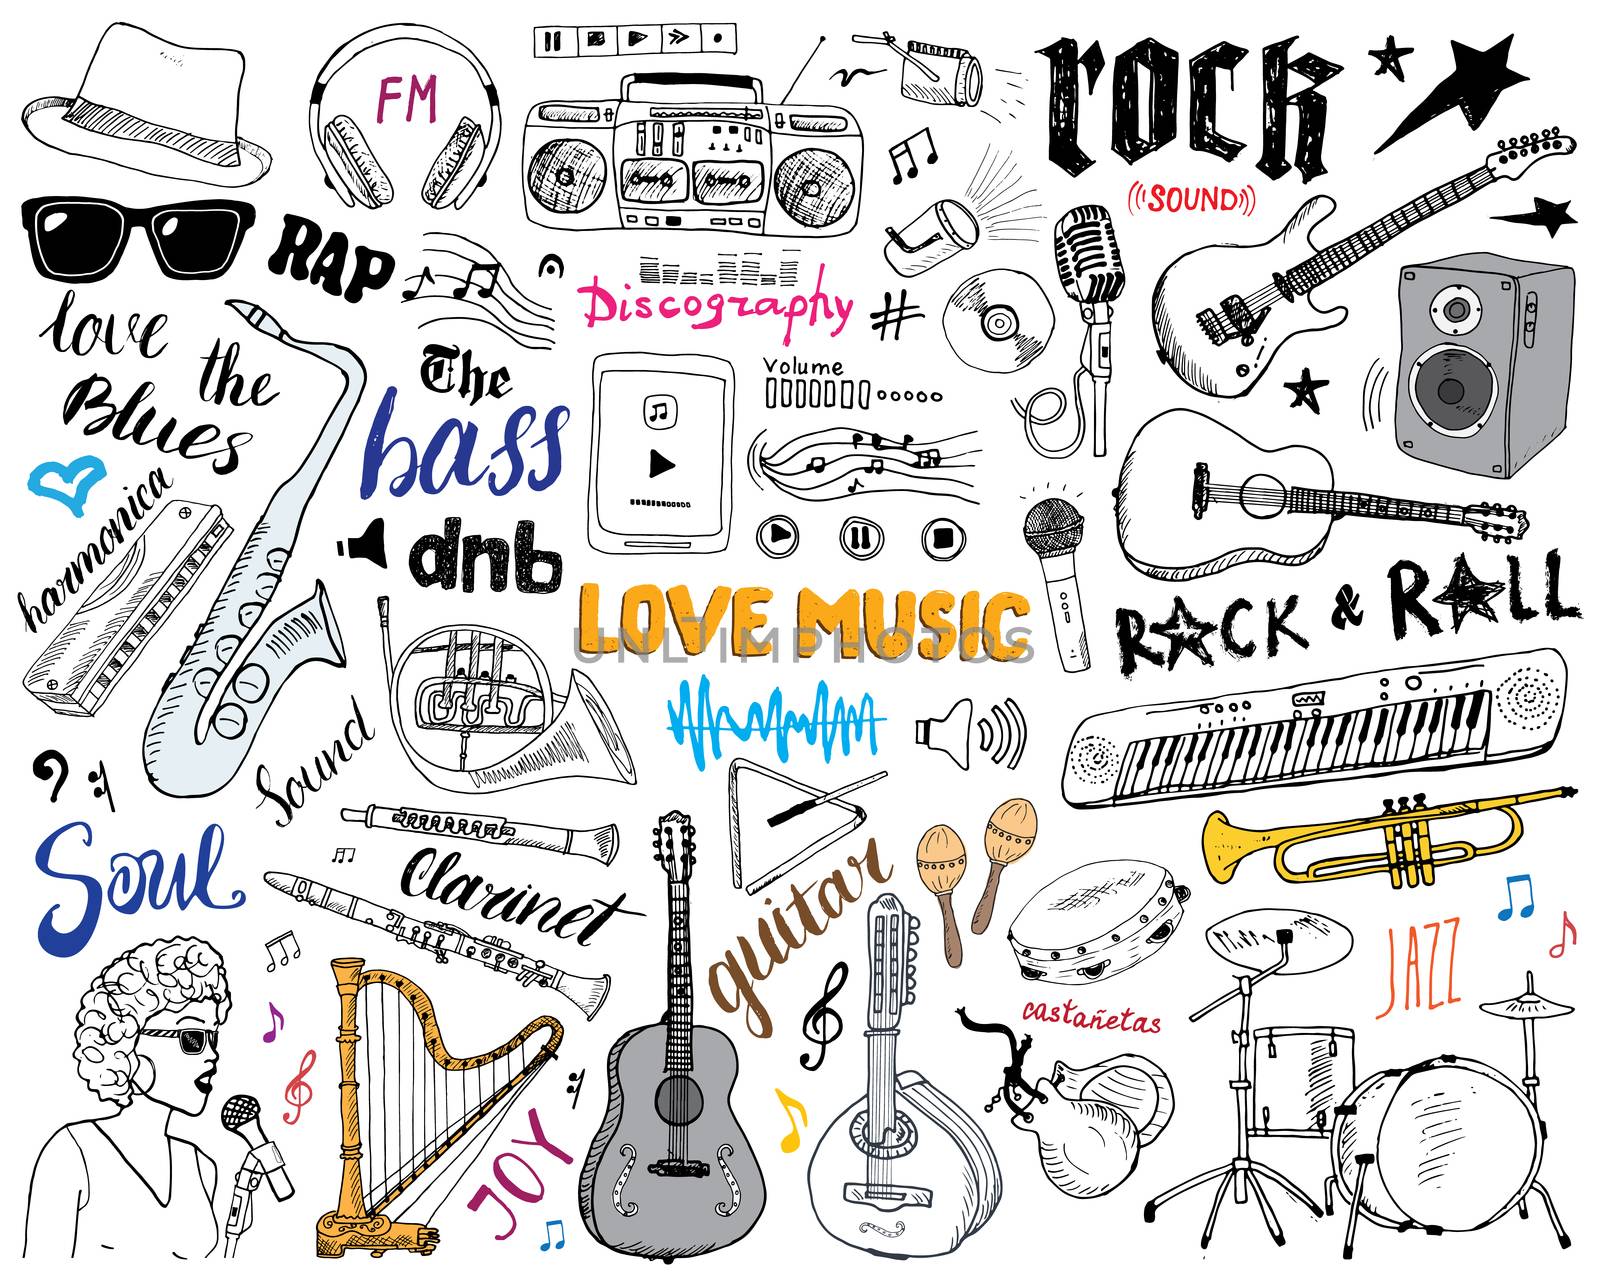 Music Instruments Set. Hand Drawn Sketch, Vector Illustration Isolated